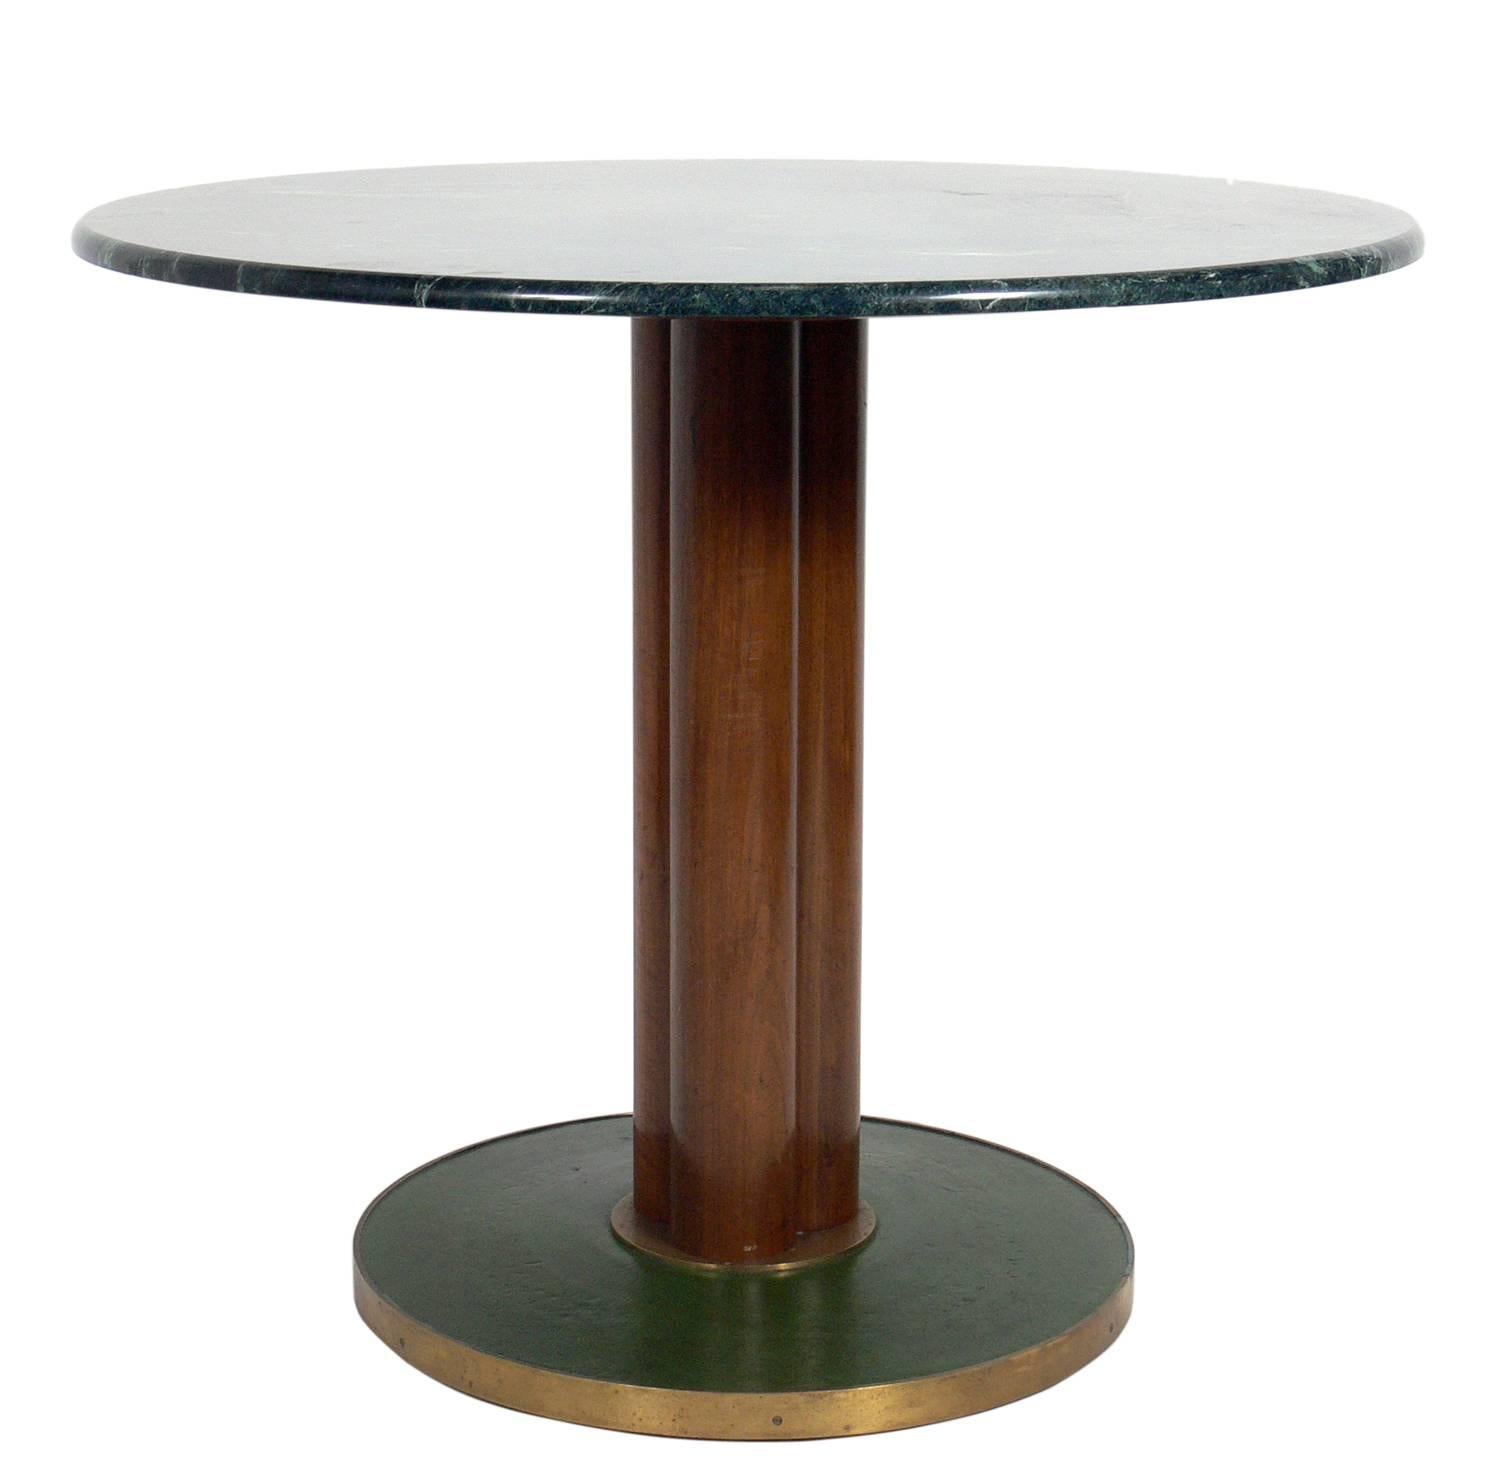 Rare and early marble-top table, designed by Edward Wormley for Dunbar, circa late 1940s. This is a versatile size and can be used as a dining table, game table, or centre table. It is constructed of marble, mahogany, leather and brass.